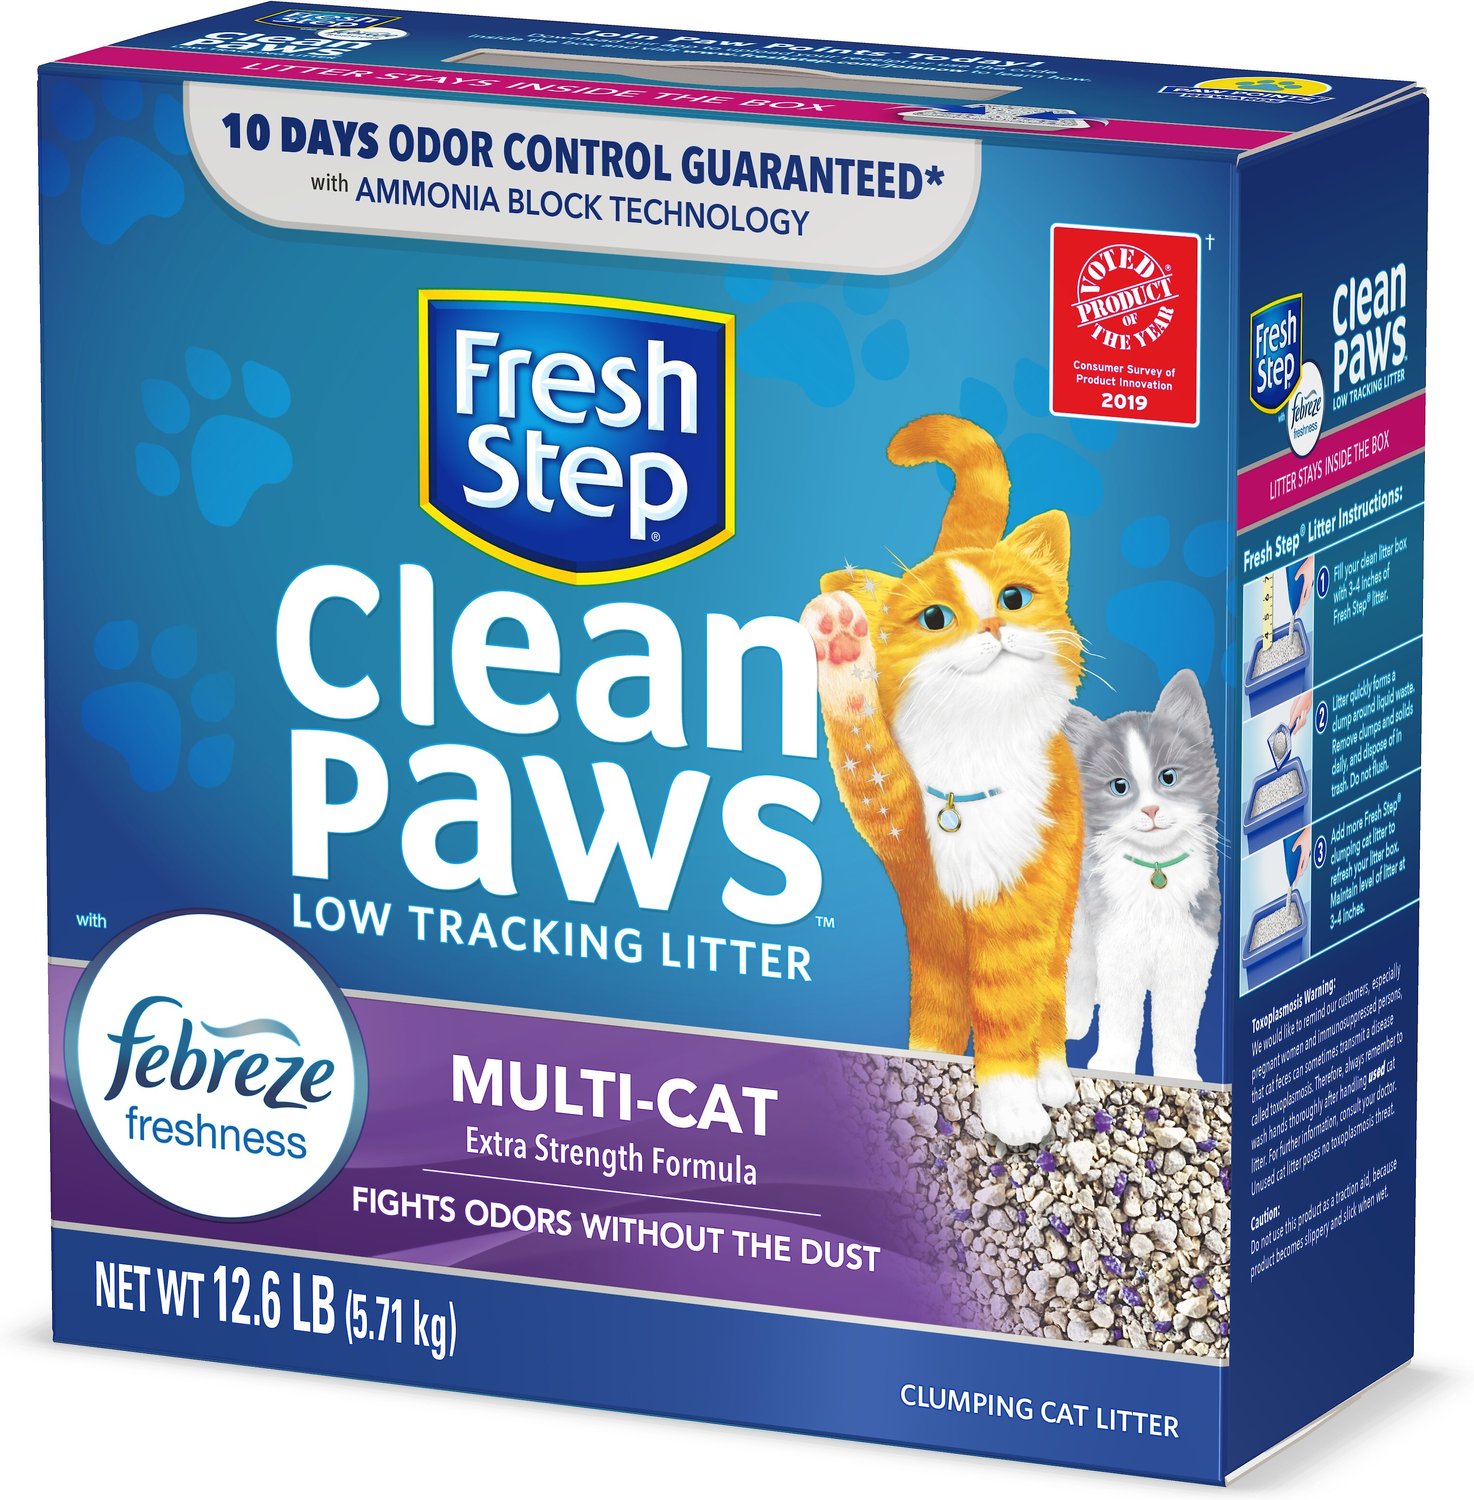 Fresh Step Clean Paws MultiCat Low Tracking Cat Litter, 12.6lb box